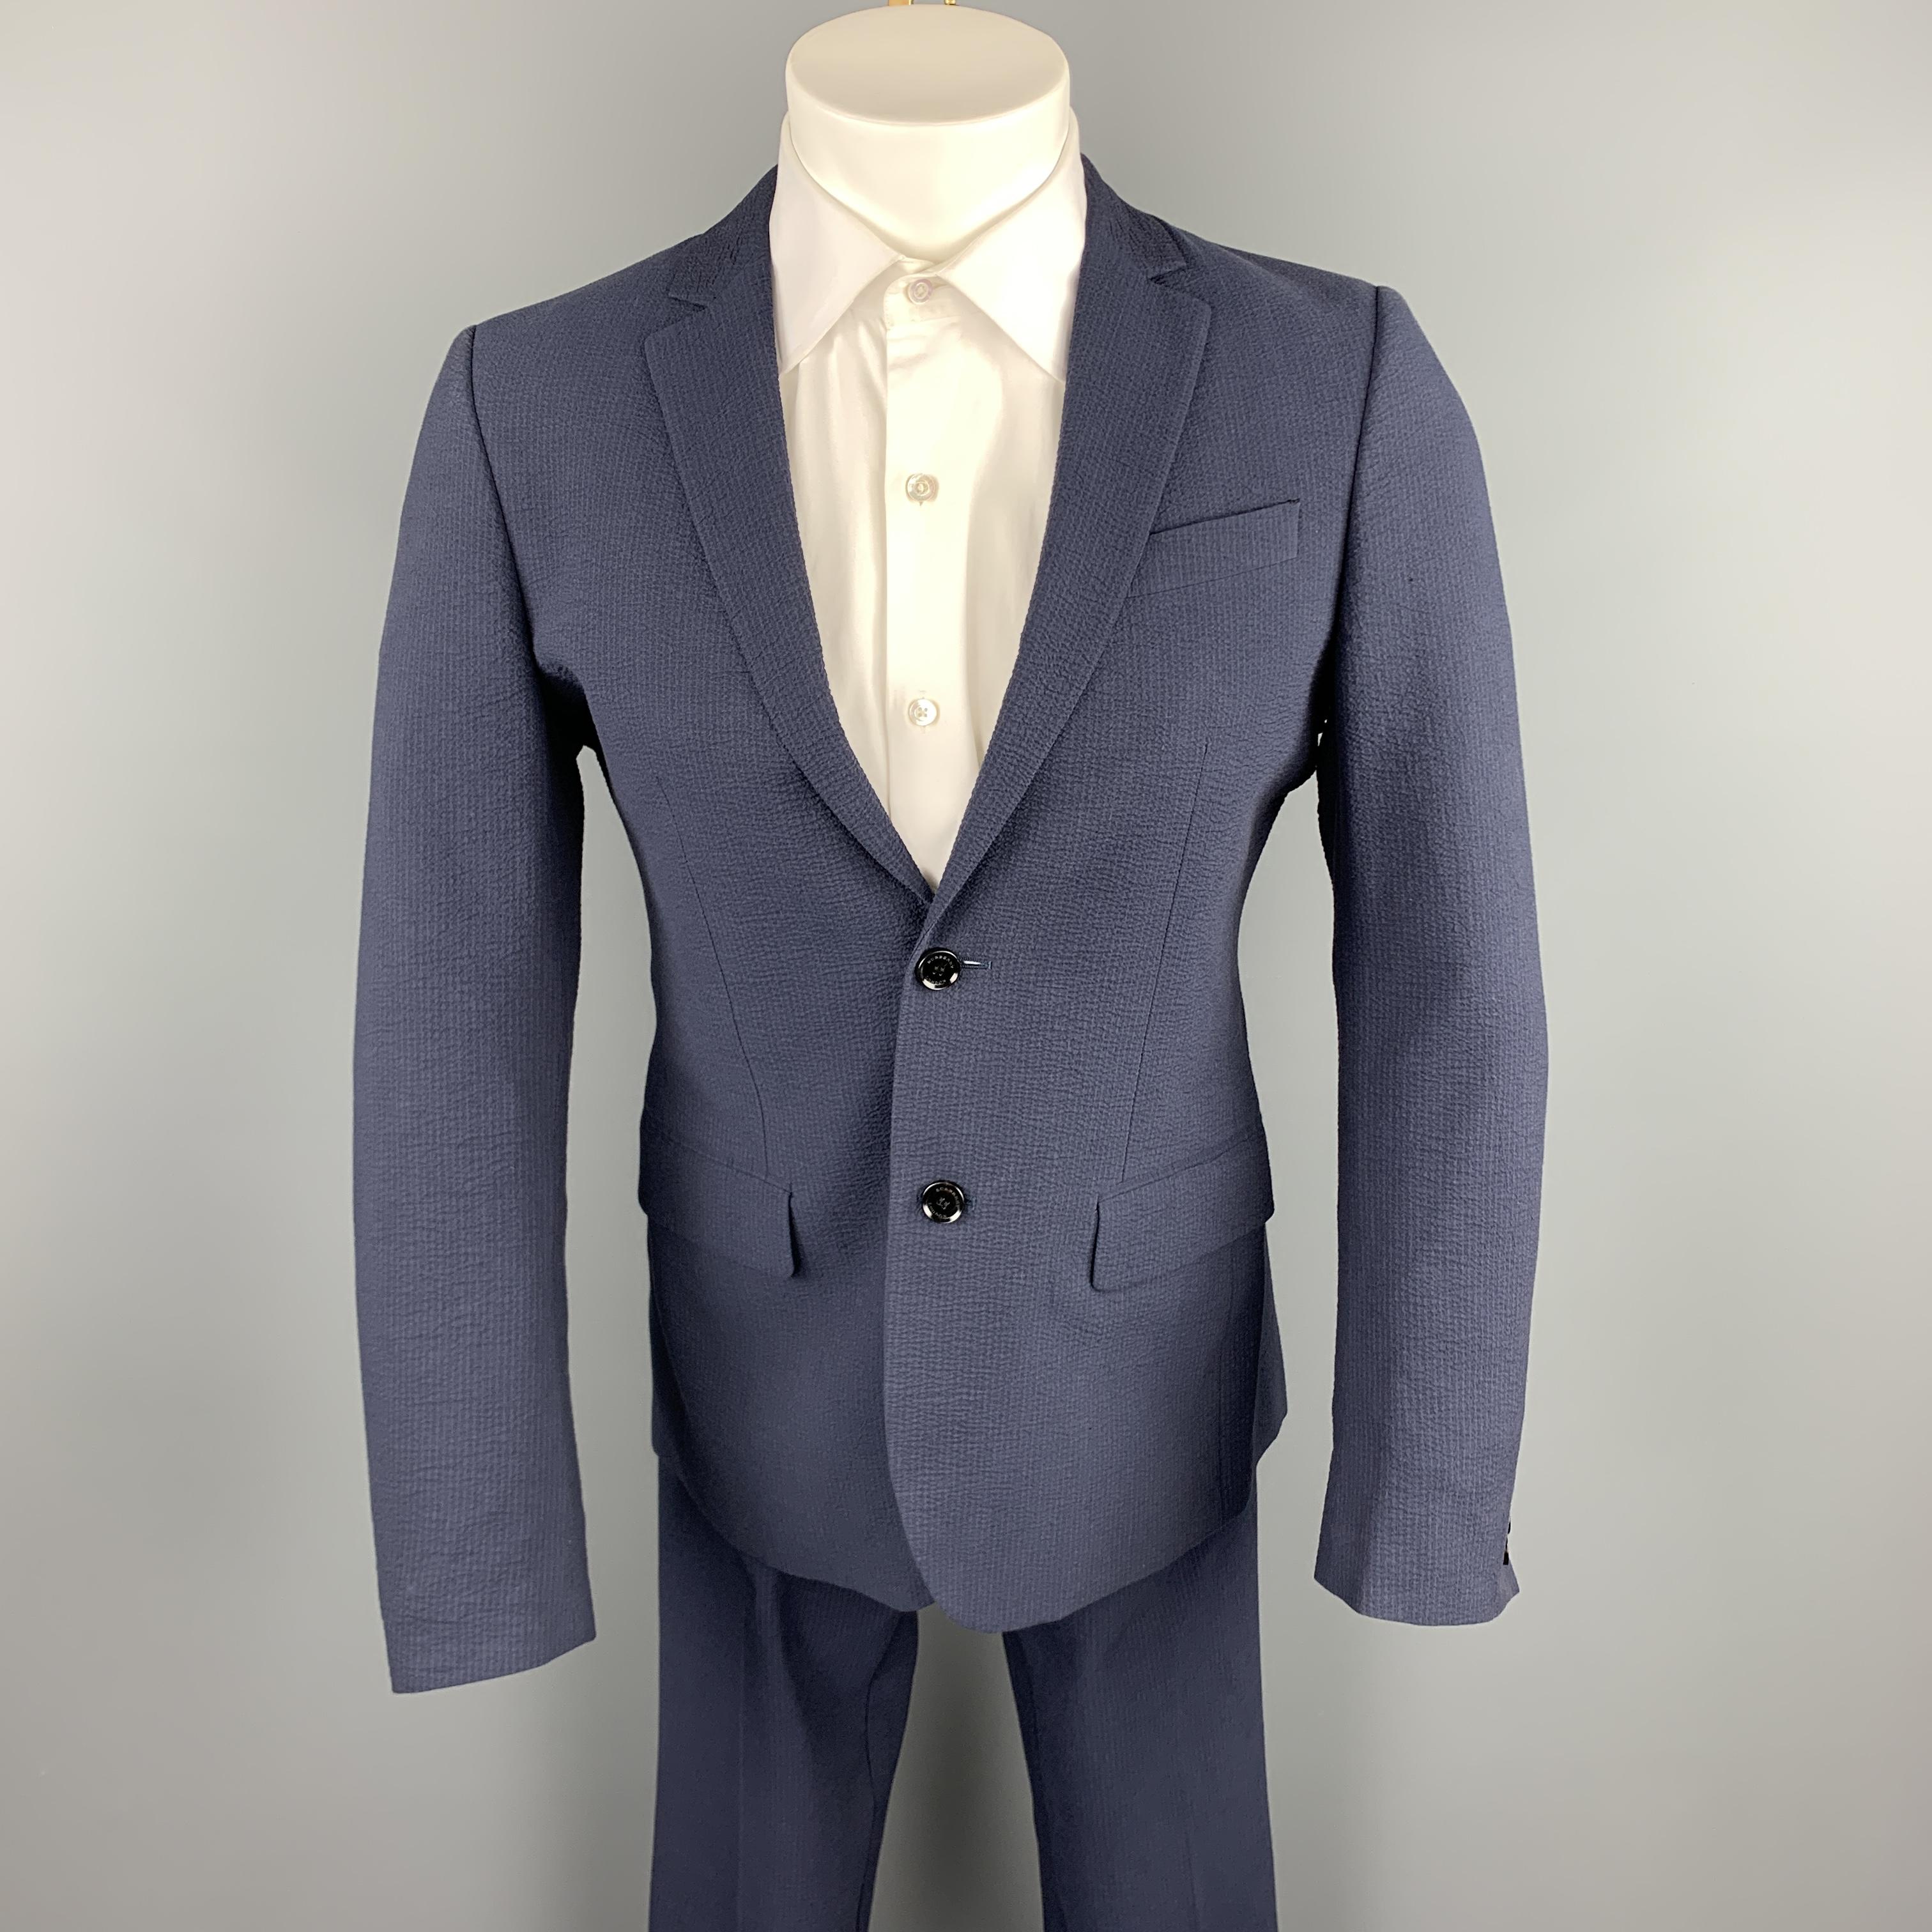 BURBERRY LONDON suit comes in a navy seersucker cotton and includes a single breasted, two button sport coat with a notch lapel, monogram liner, and matching flat front trousers. Made in Italy

New With Tags.
Marked: 46 S
Original Retail Price: